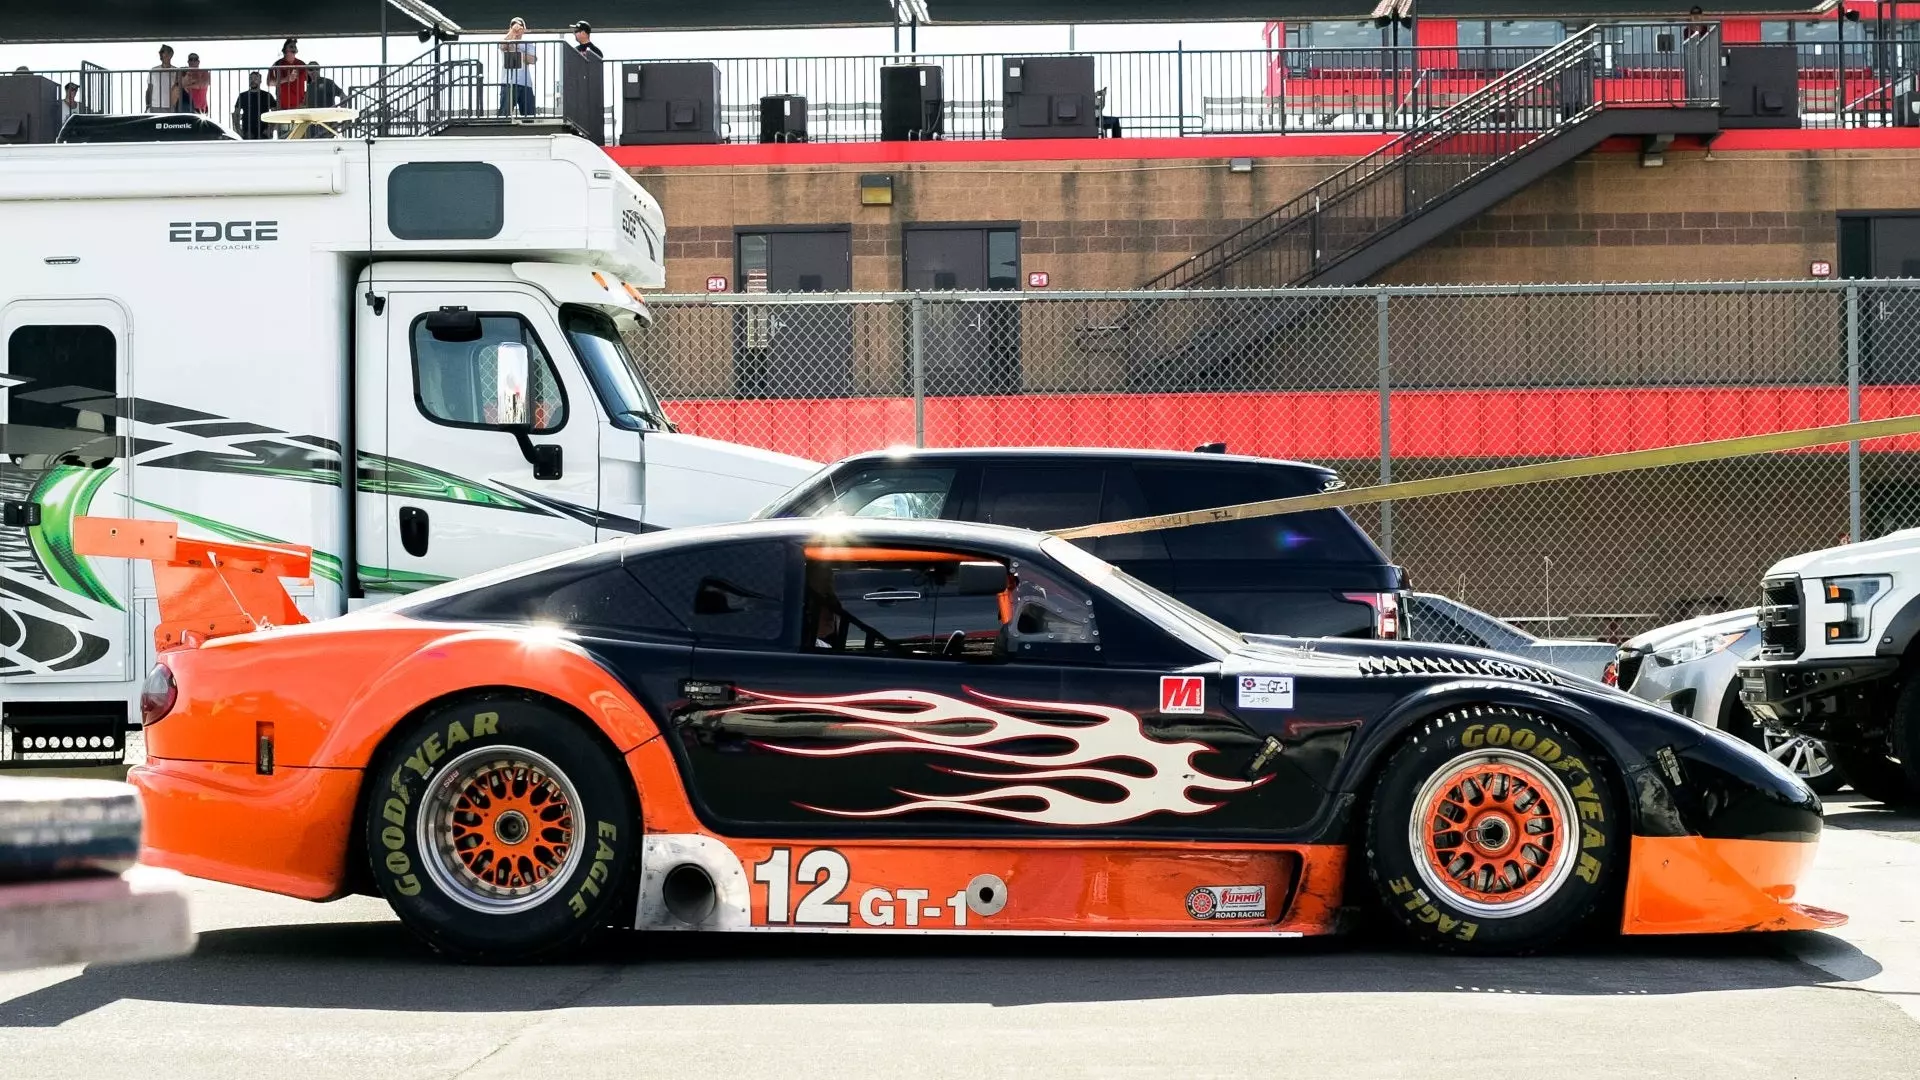 The Early 2000s Jaguar XKR Made for a Beautiful Trans Am Racecar